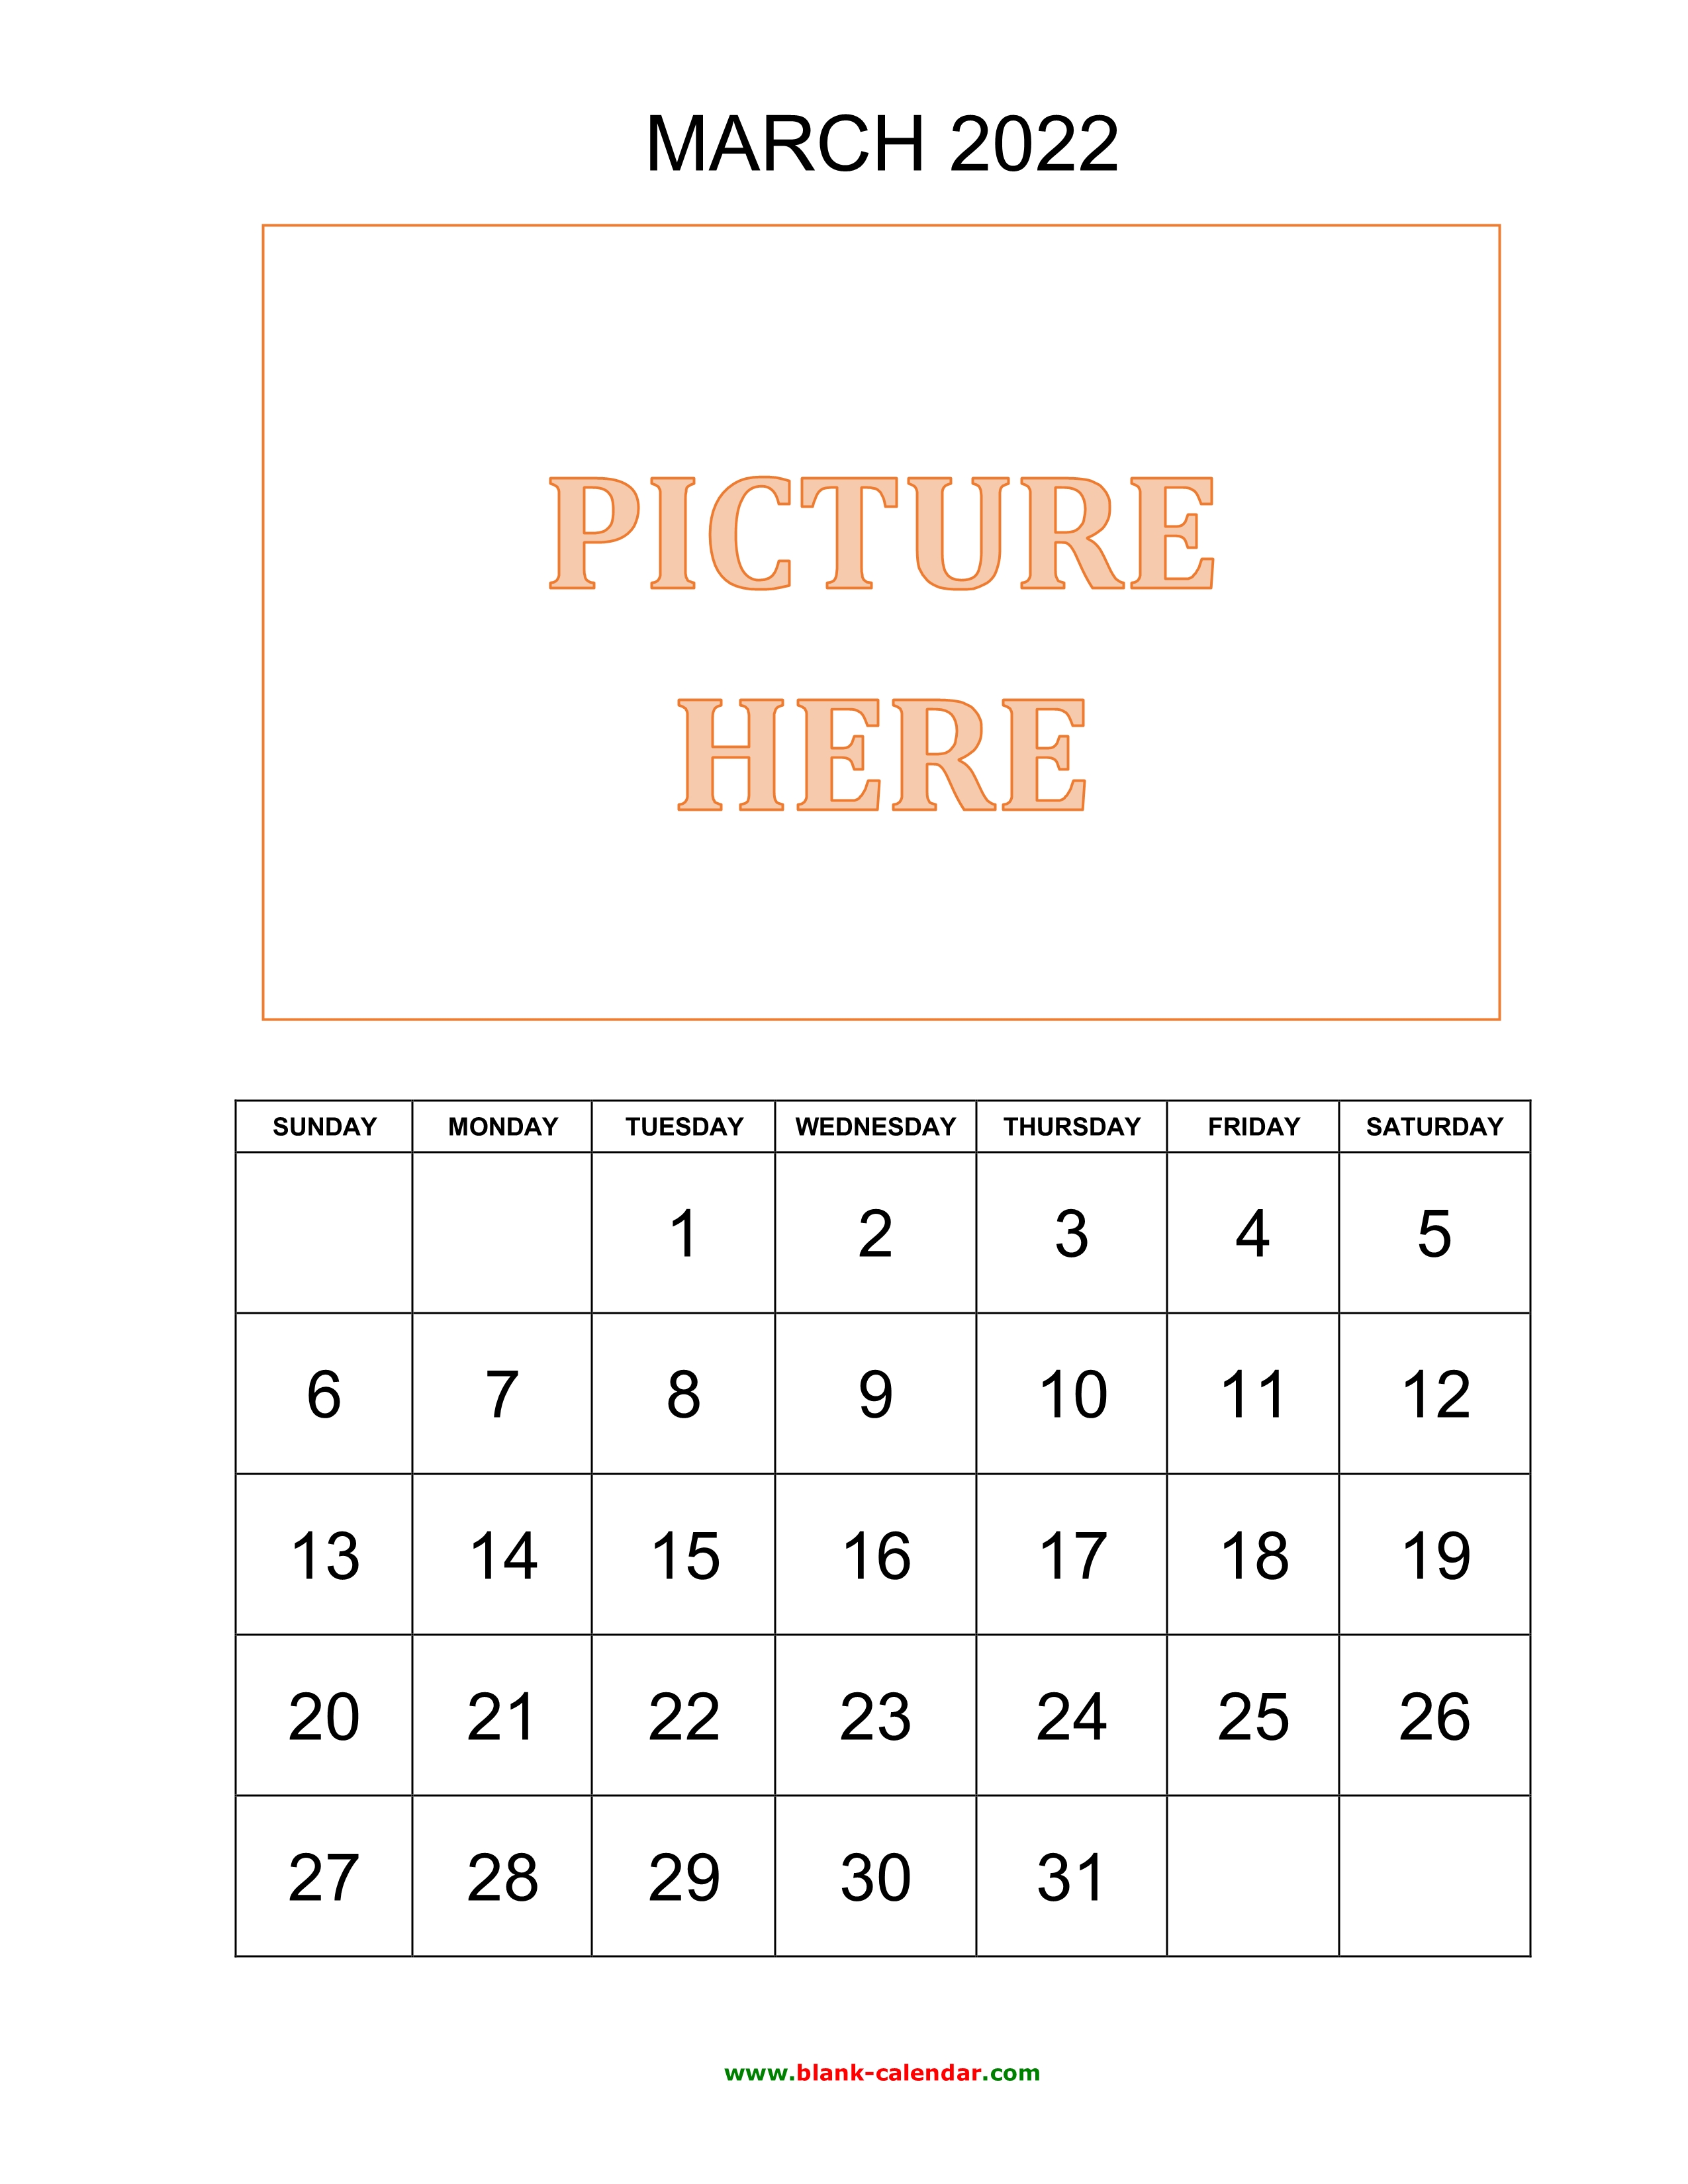 Free Download Printable March 2022 Calendar Pictures Can Be Placed At